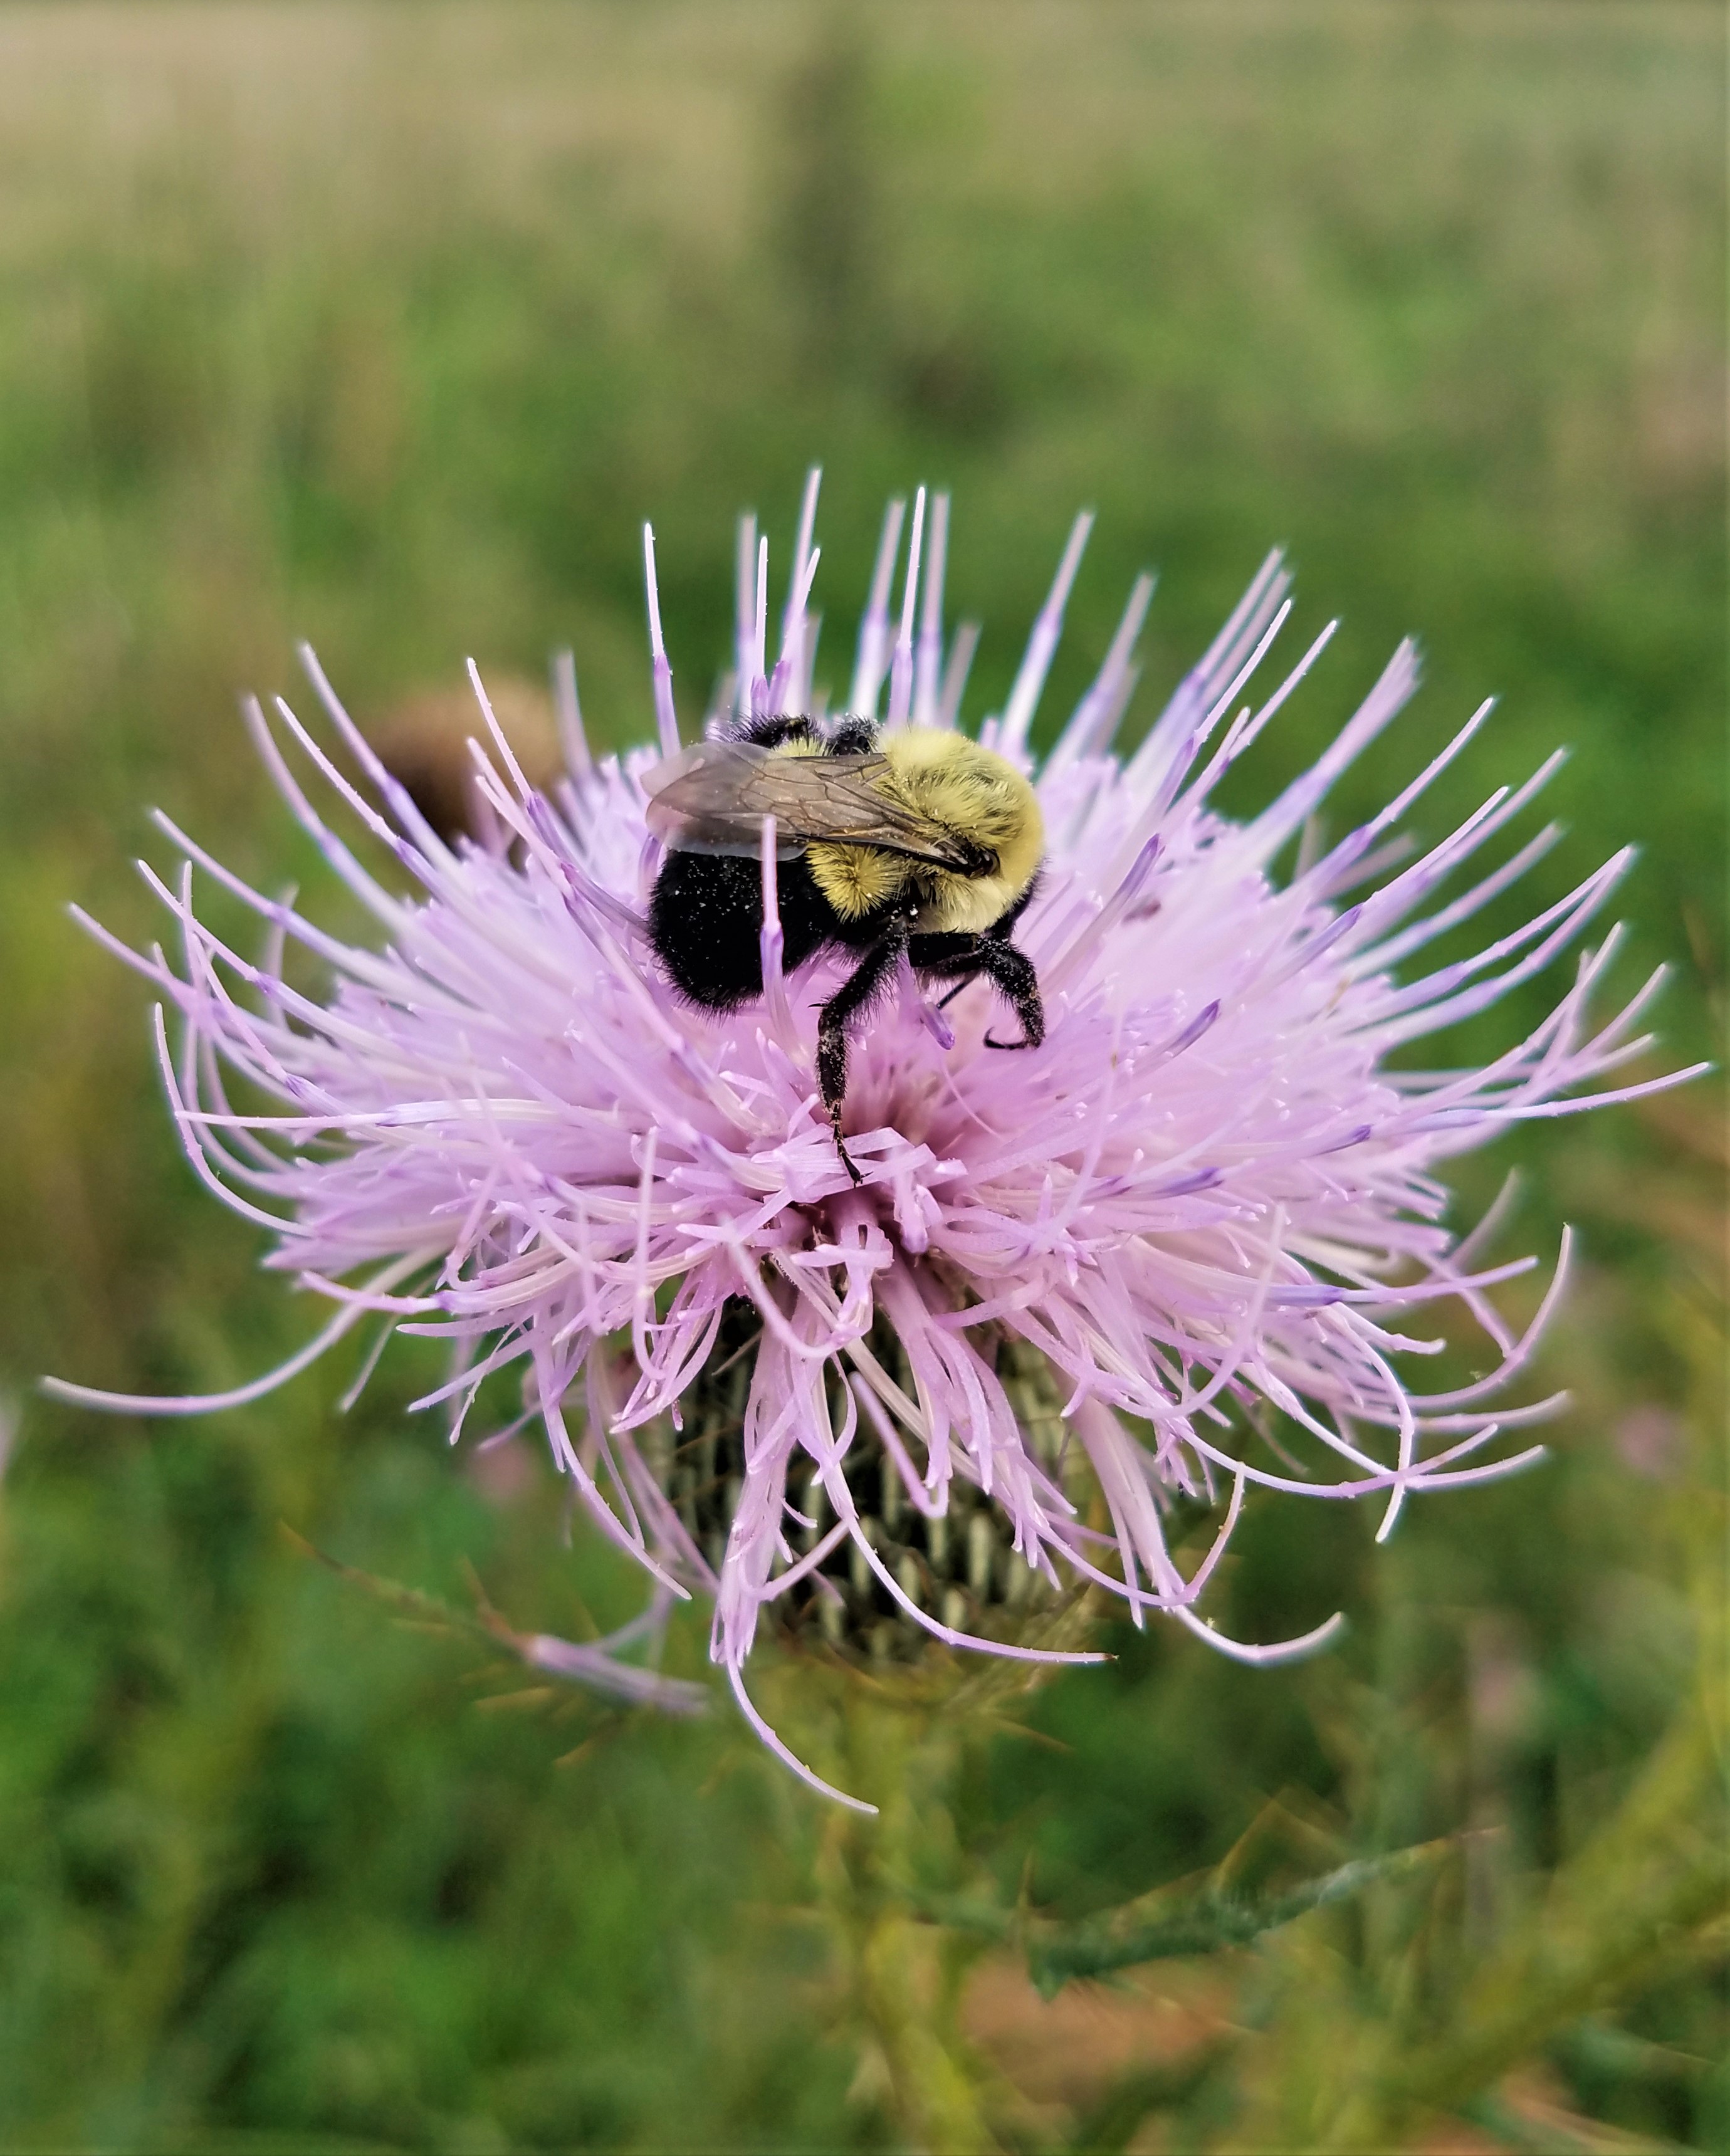 In the center of a large pink-colored thistle bloom is a black and yellow bumble bee.